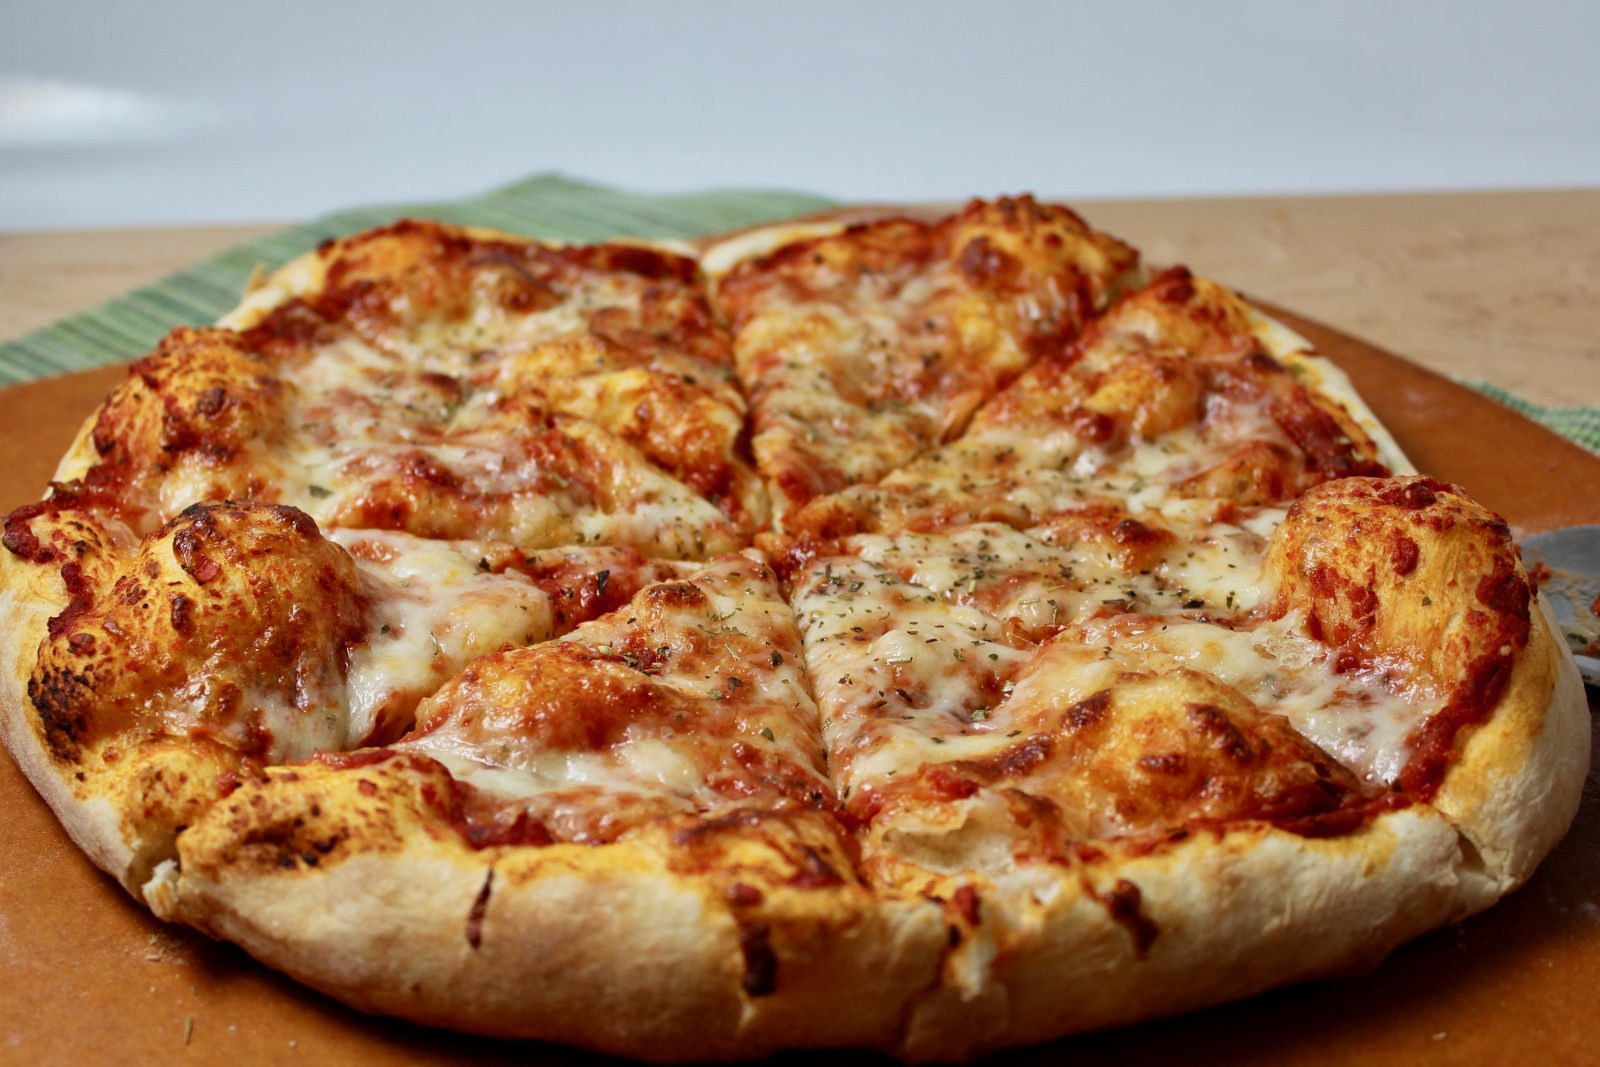 Pizza Siciliana, round pizza with light crispy crust, topped with